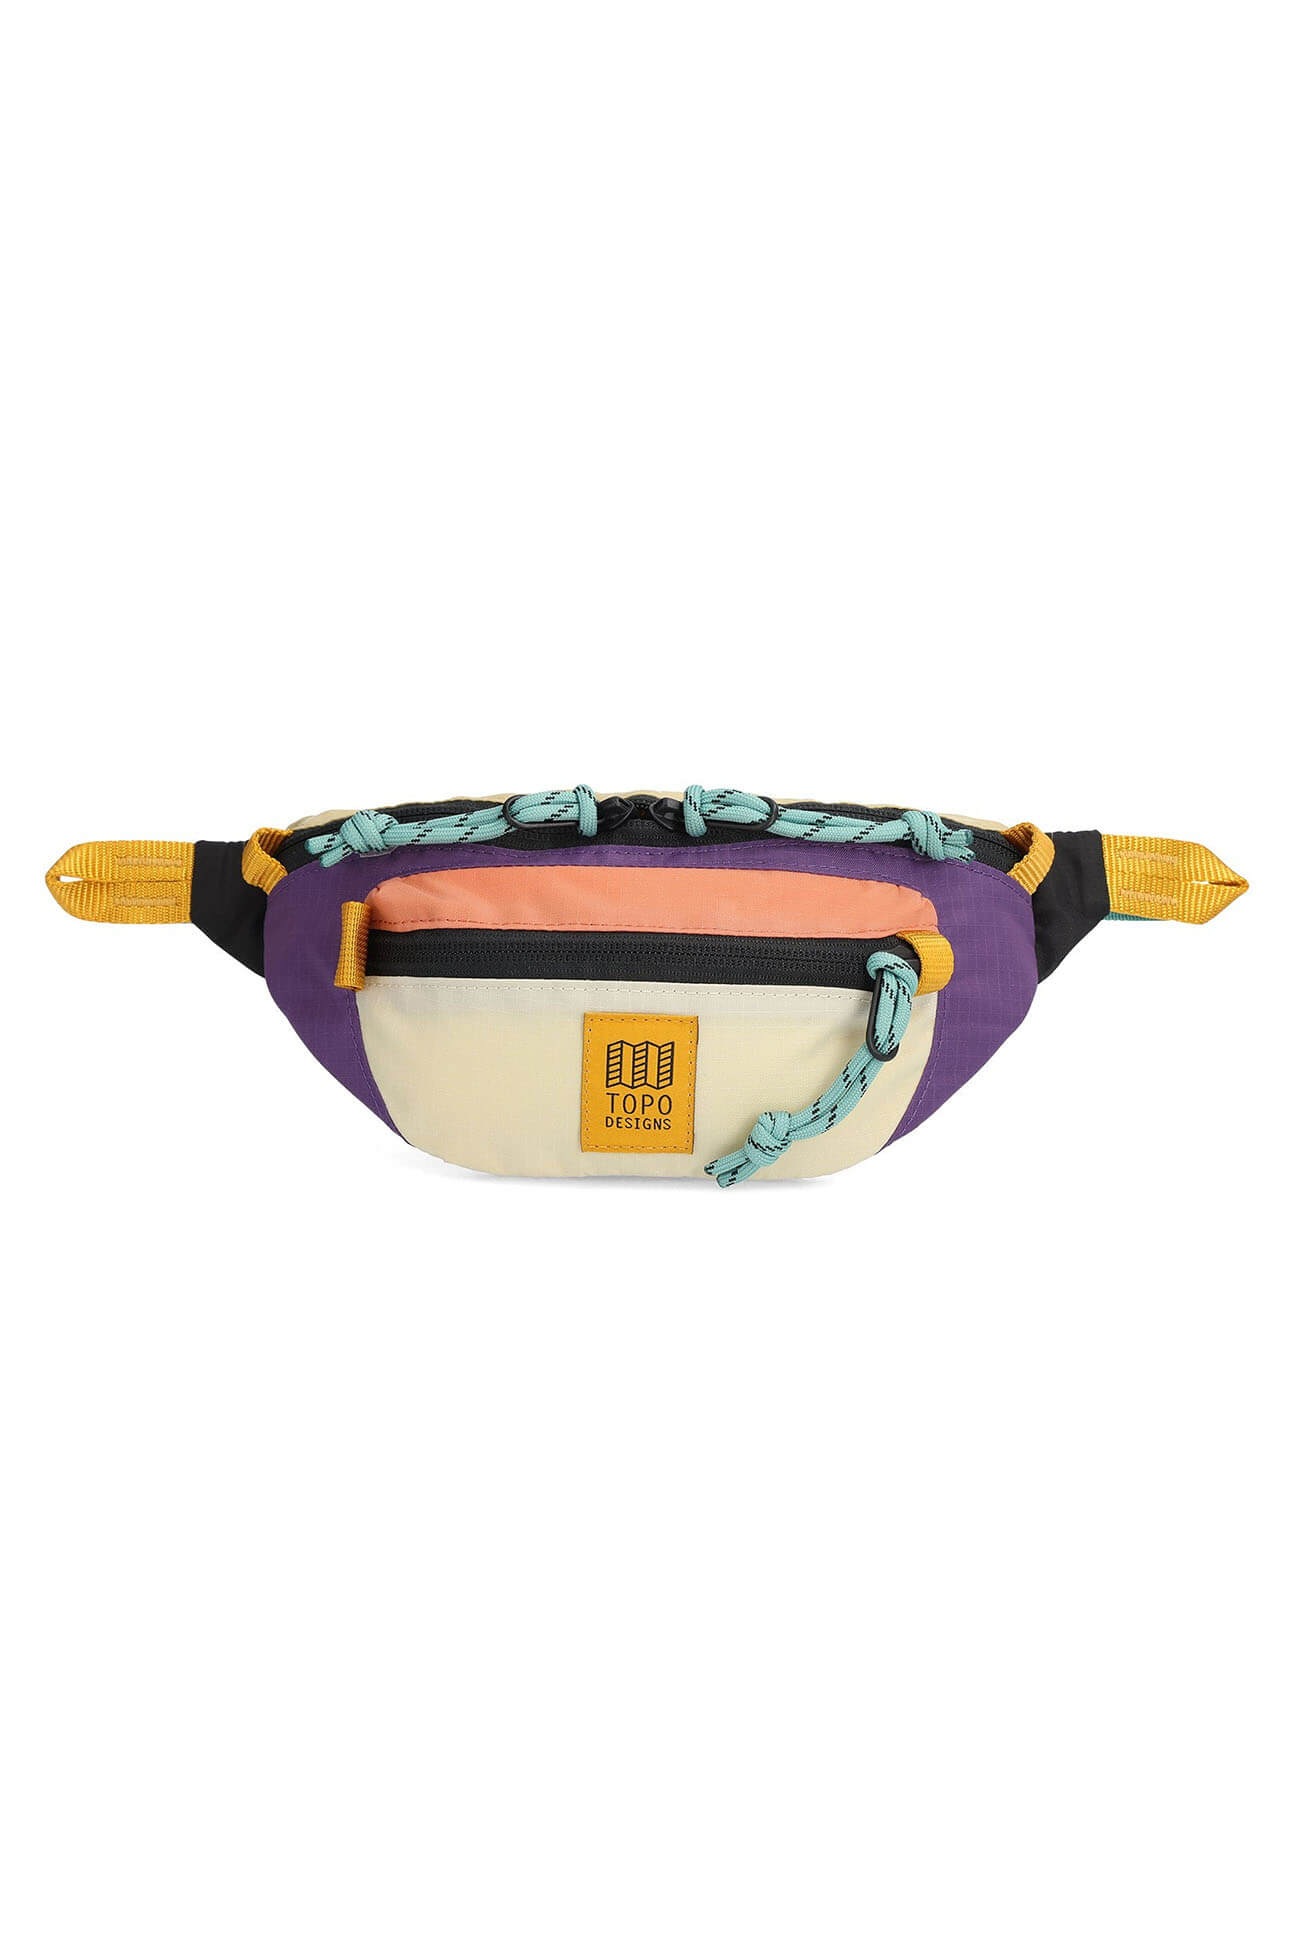 Topo Designs mountain waist pack in loganberry and bone white